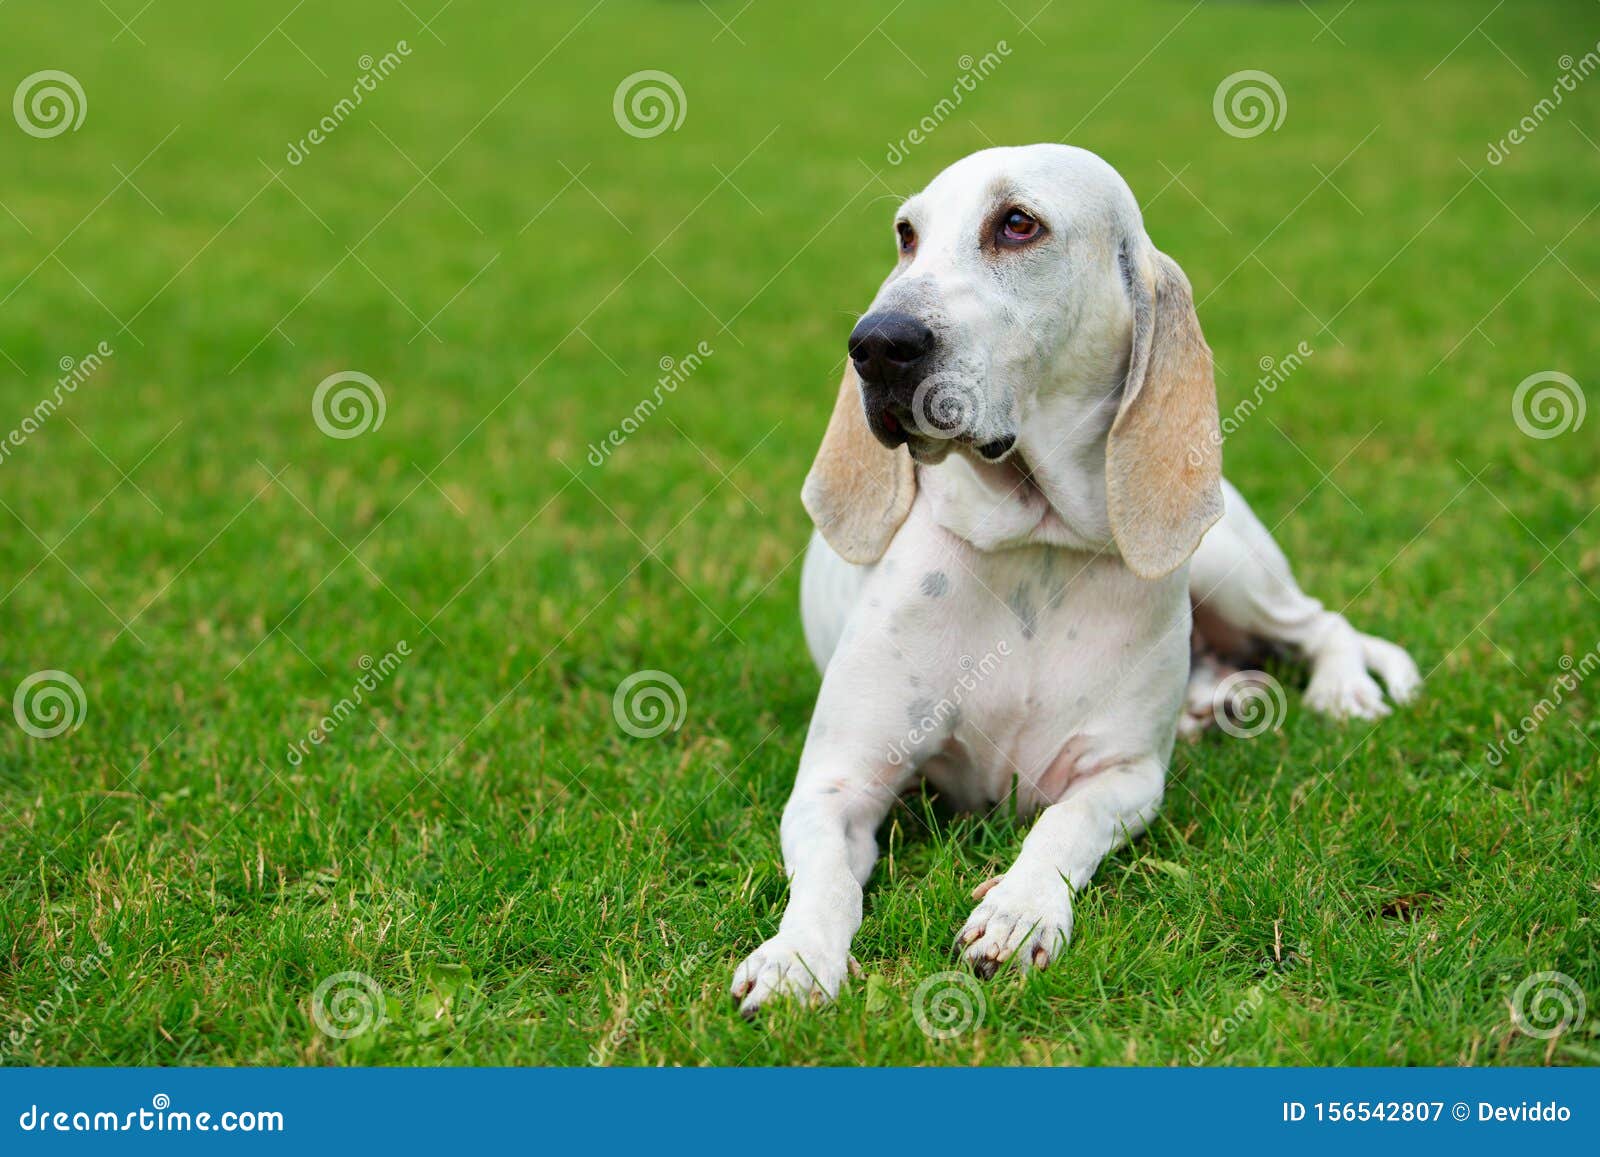 Billy Dog Stock Photos - Royalty-Free Photos from